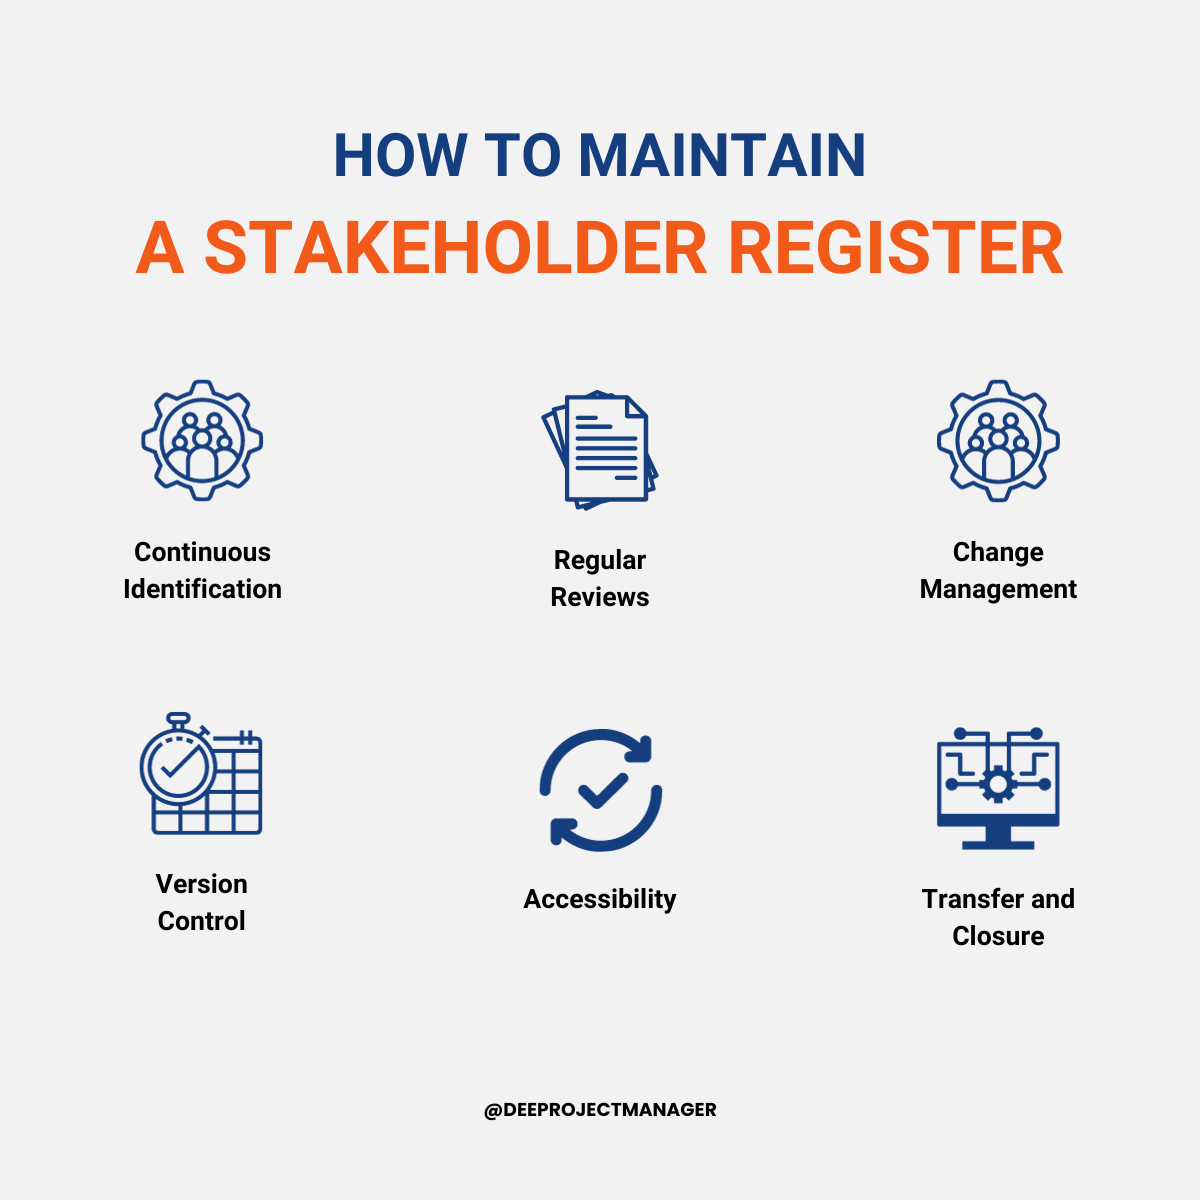 How to Maintain a Stakeholder Register